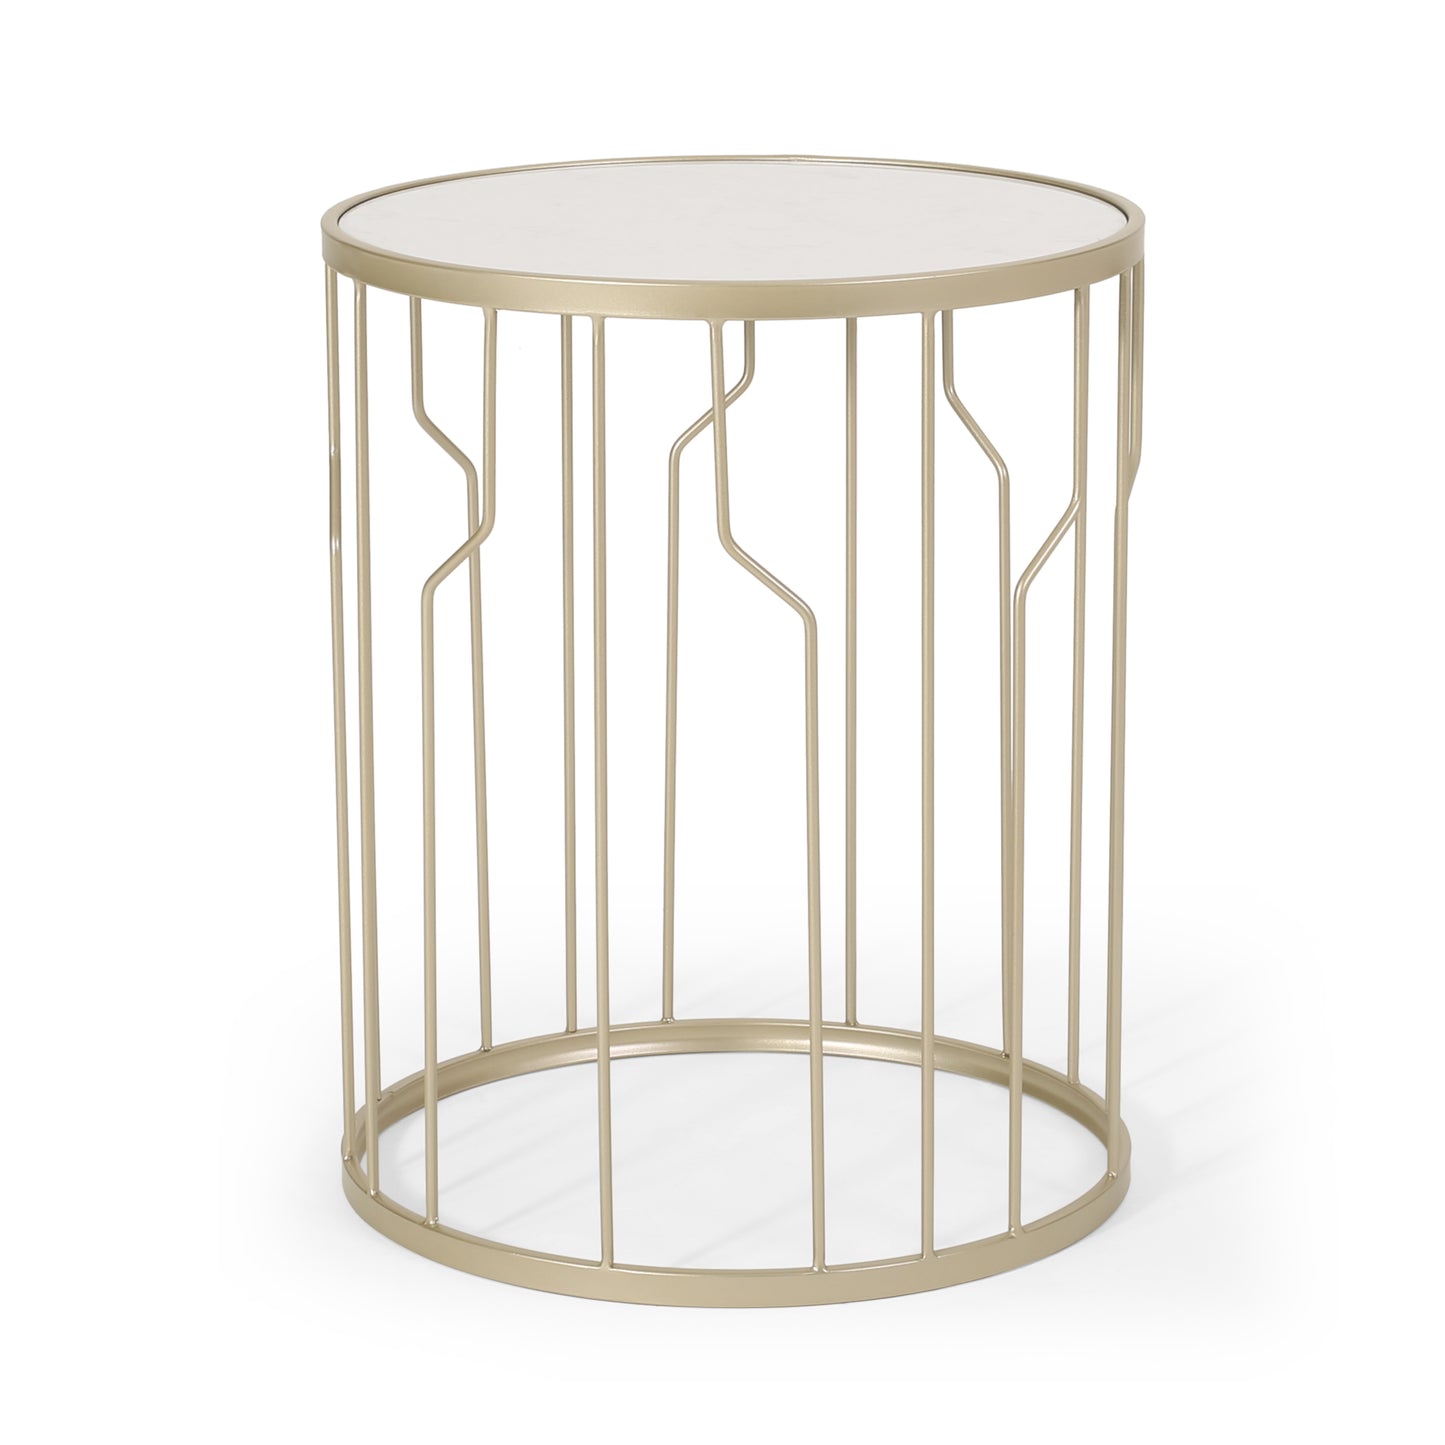 Finethy Modern Glam Faux Marble Side Table, White and Champagne Silver